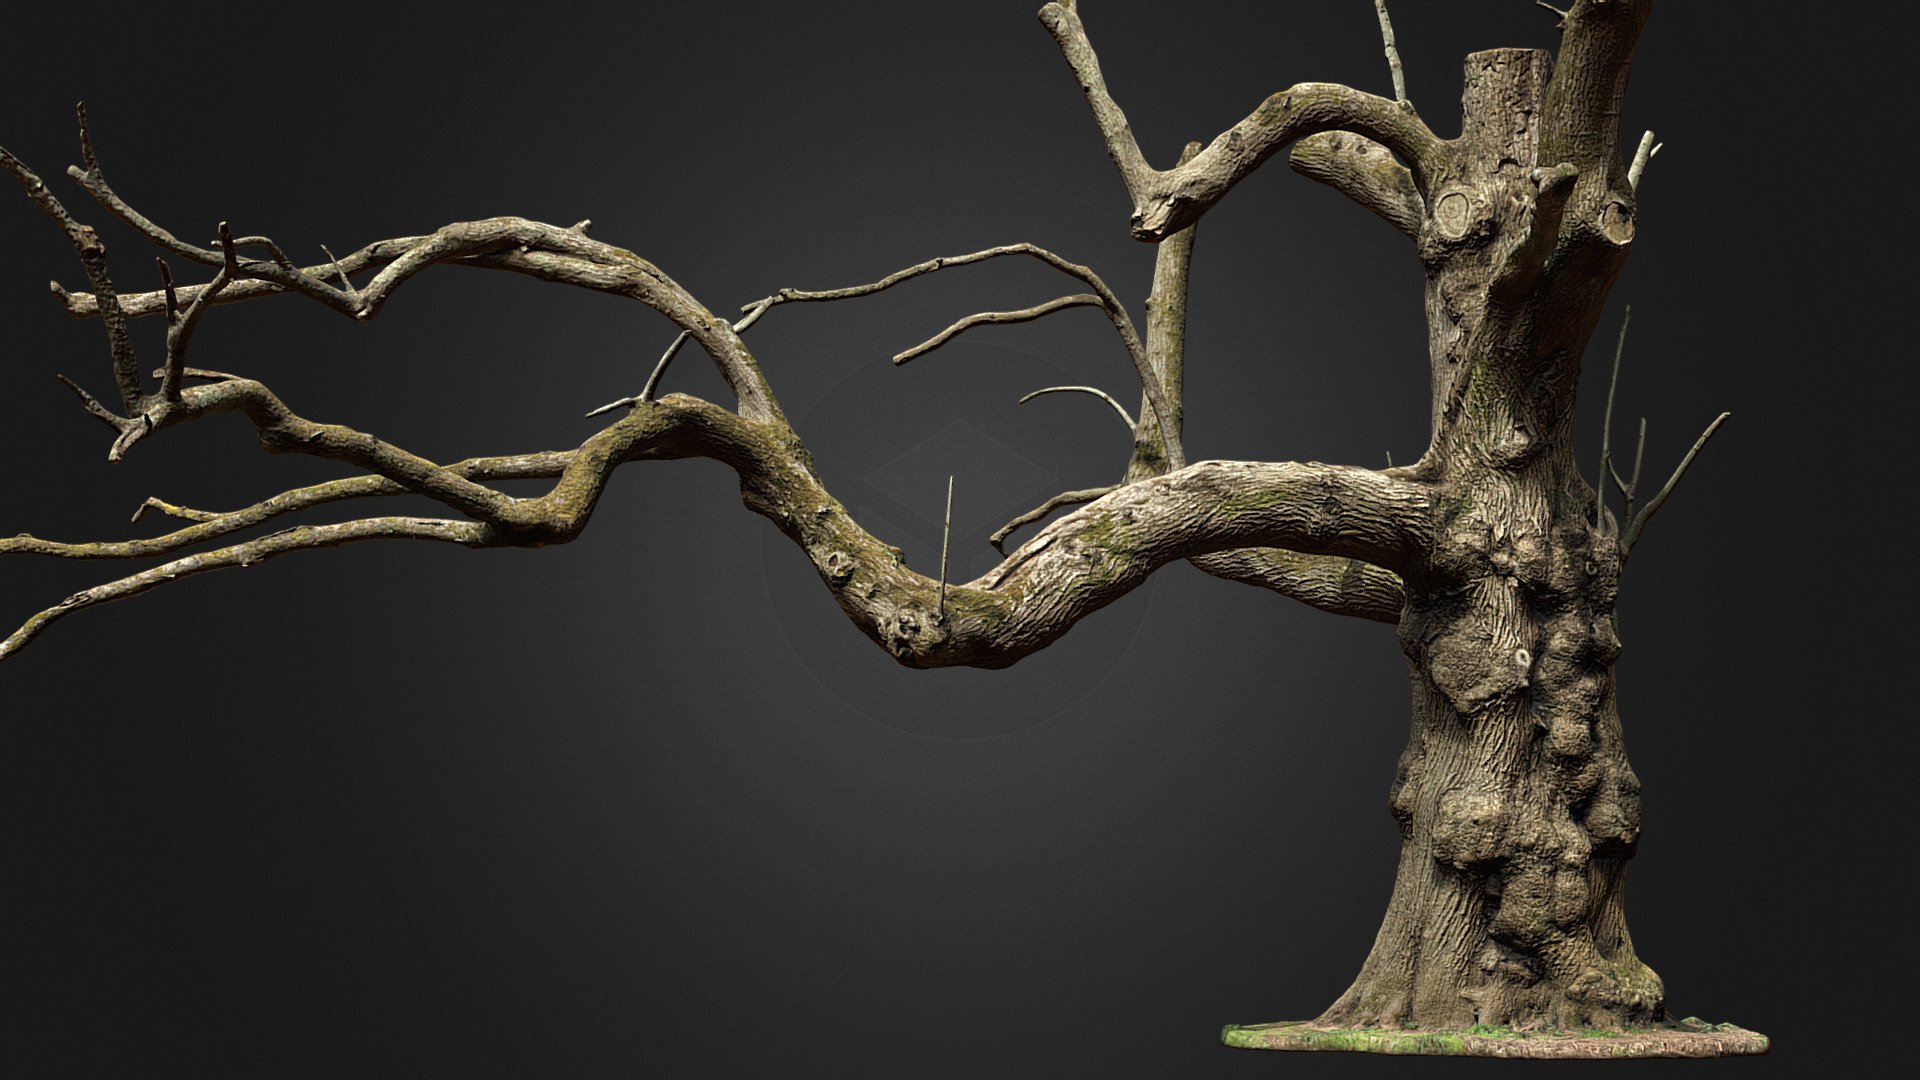 Chestnut tree trunk
Reconstructed in 3D using photogrammetry

110683 triangles

8k textures (color, normal,occlusion)

Format .blend and .obj - Chestnut tree (photogrammetry) - Buy Royalty Free 3D model by jemian29 3d model